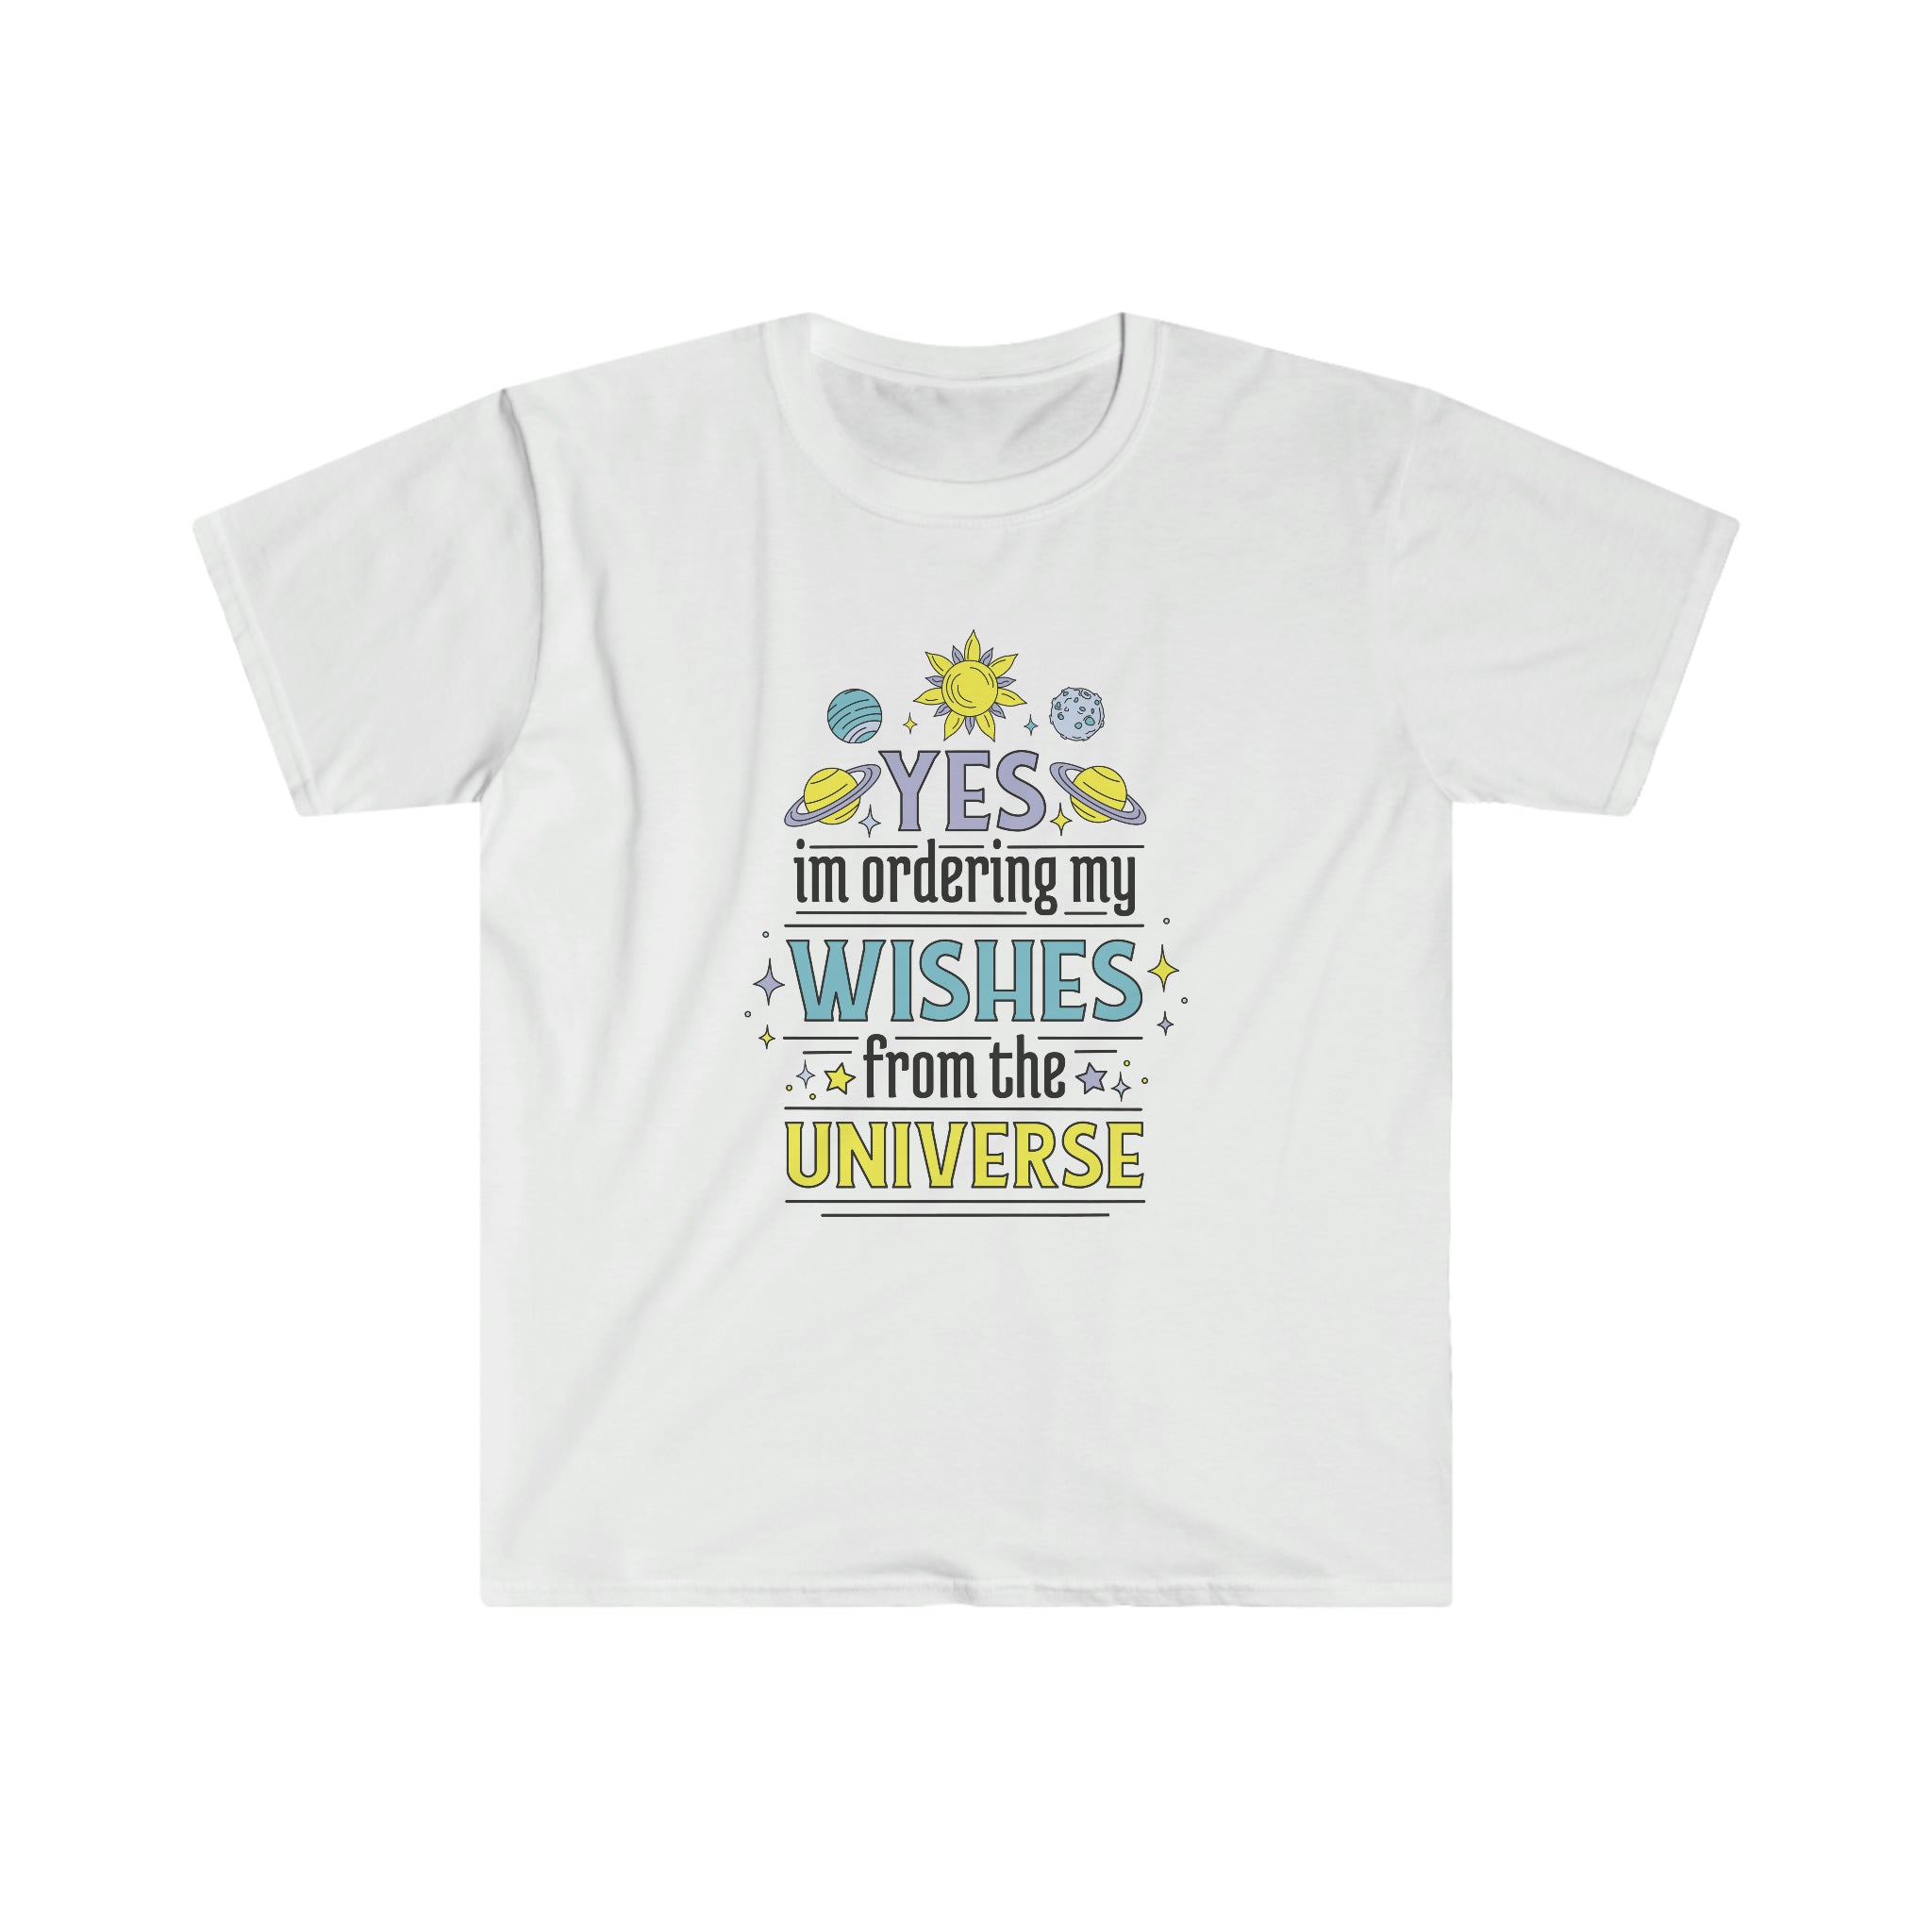 Ordering Whishes from the Universe T-Shirt